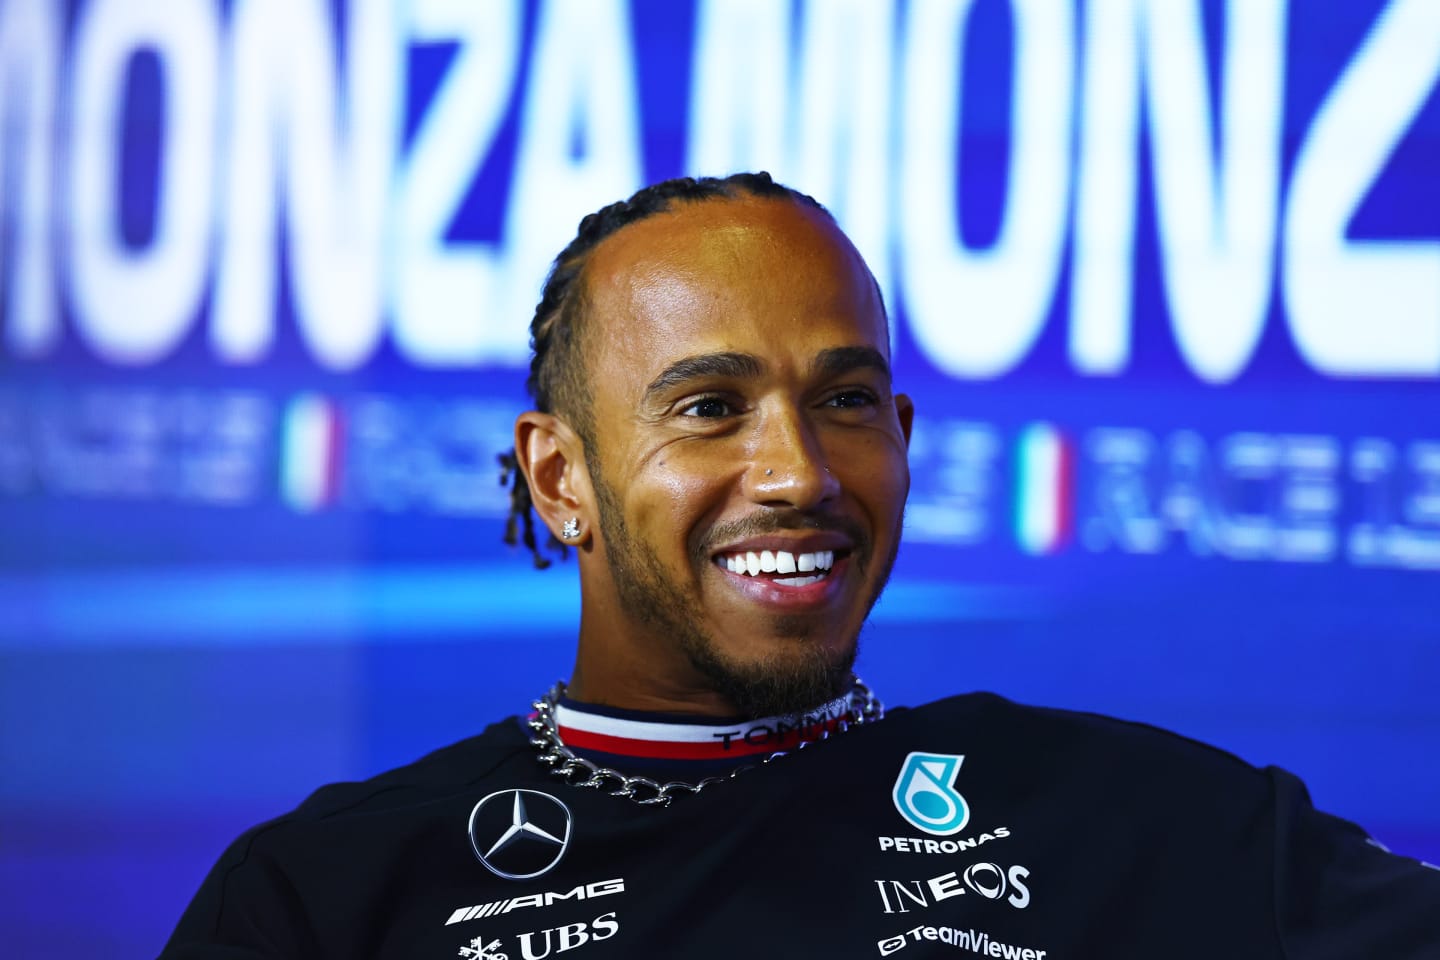 MONZA, ITALY - AUGUST 31: Lewis Hamilton of Great Britain and Mercedes attends the Drivers Press Conference during previews ahead of the F1 Grand Prix of Italy at Autodromo Nazionale Monza on August 31, 2023 in Monza, Italy. (Photo by Bryn Lennon/Getty Images)